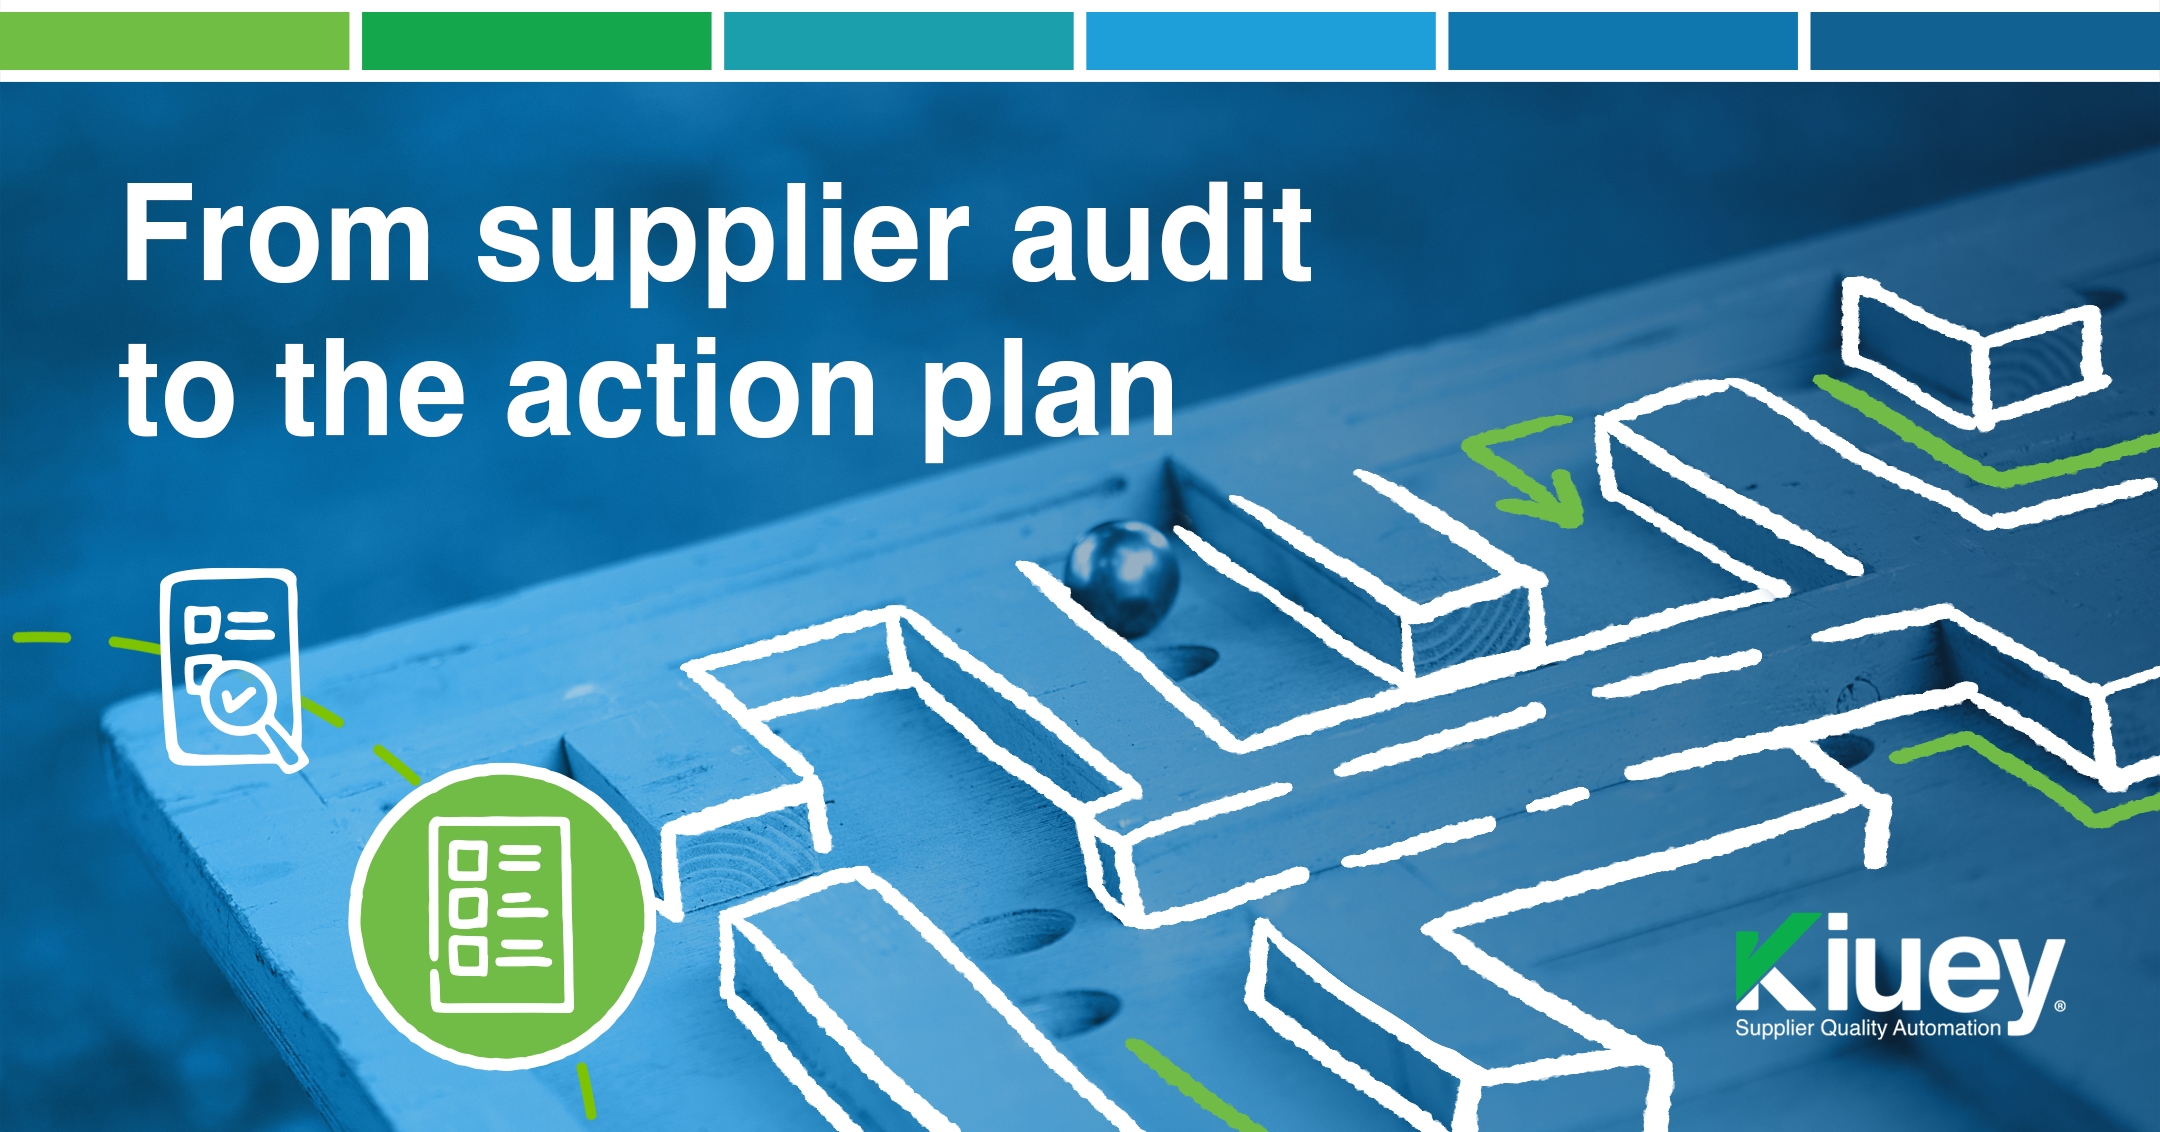 Step by step of the action plan after supplier audit